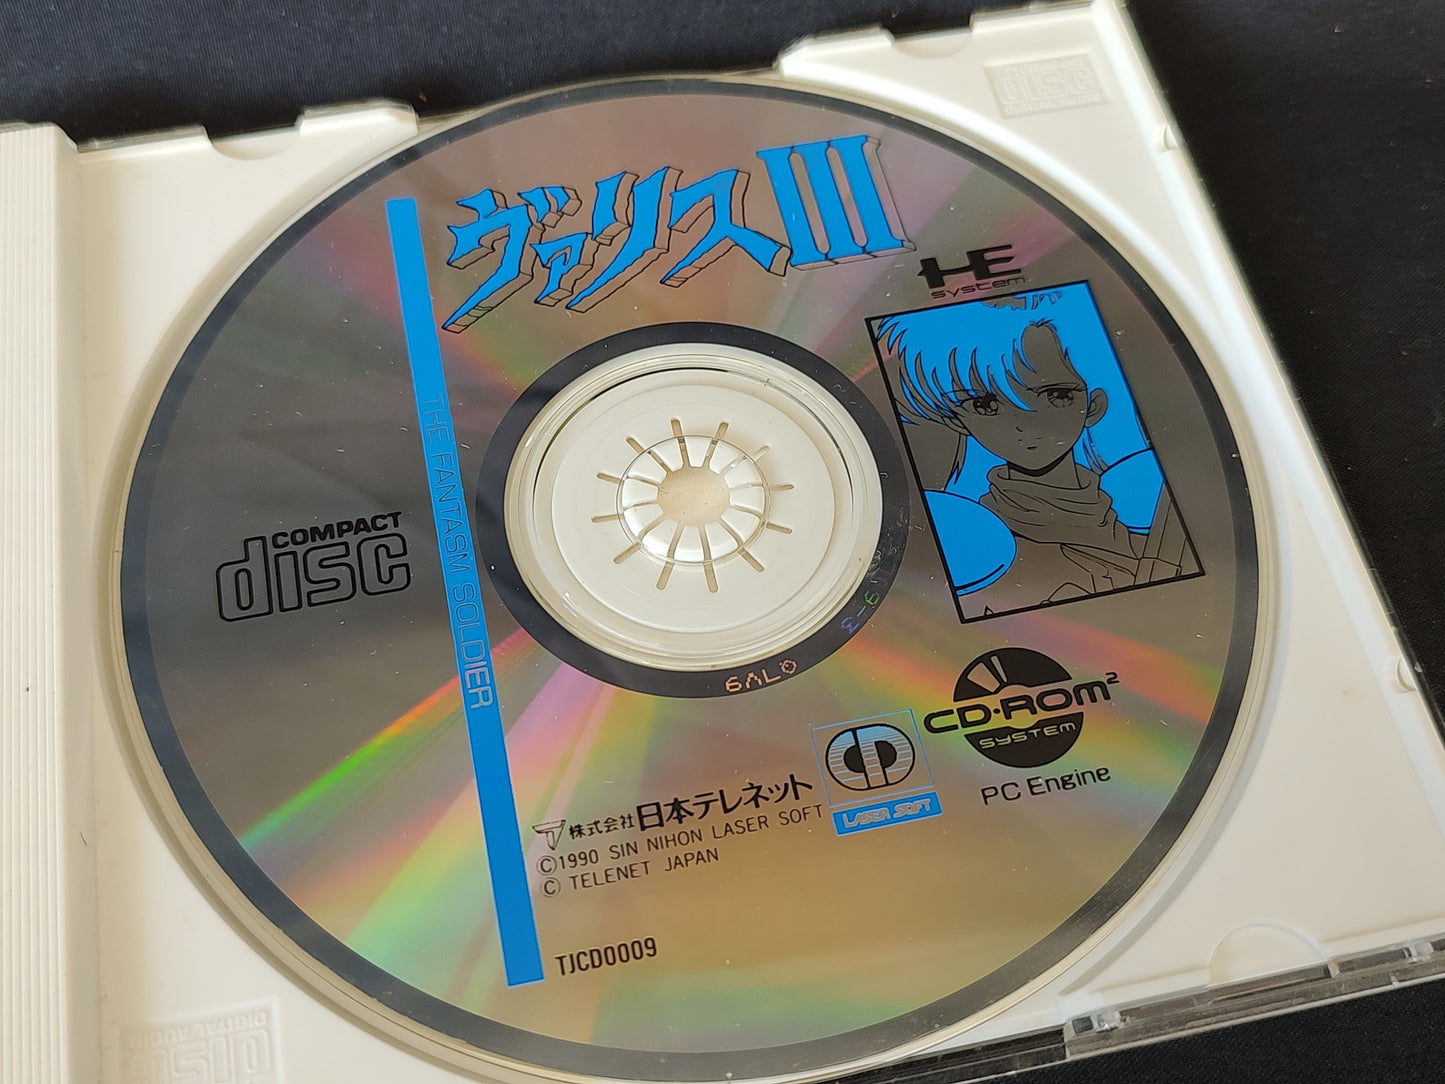 Valis 2 and 3 The Fantasm Soldier set PC Engine CD-ROM2 ,w/Manual,Cased-g0412-